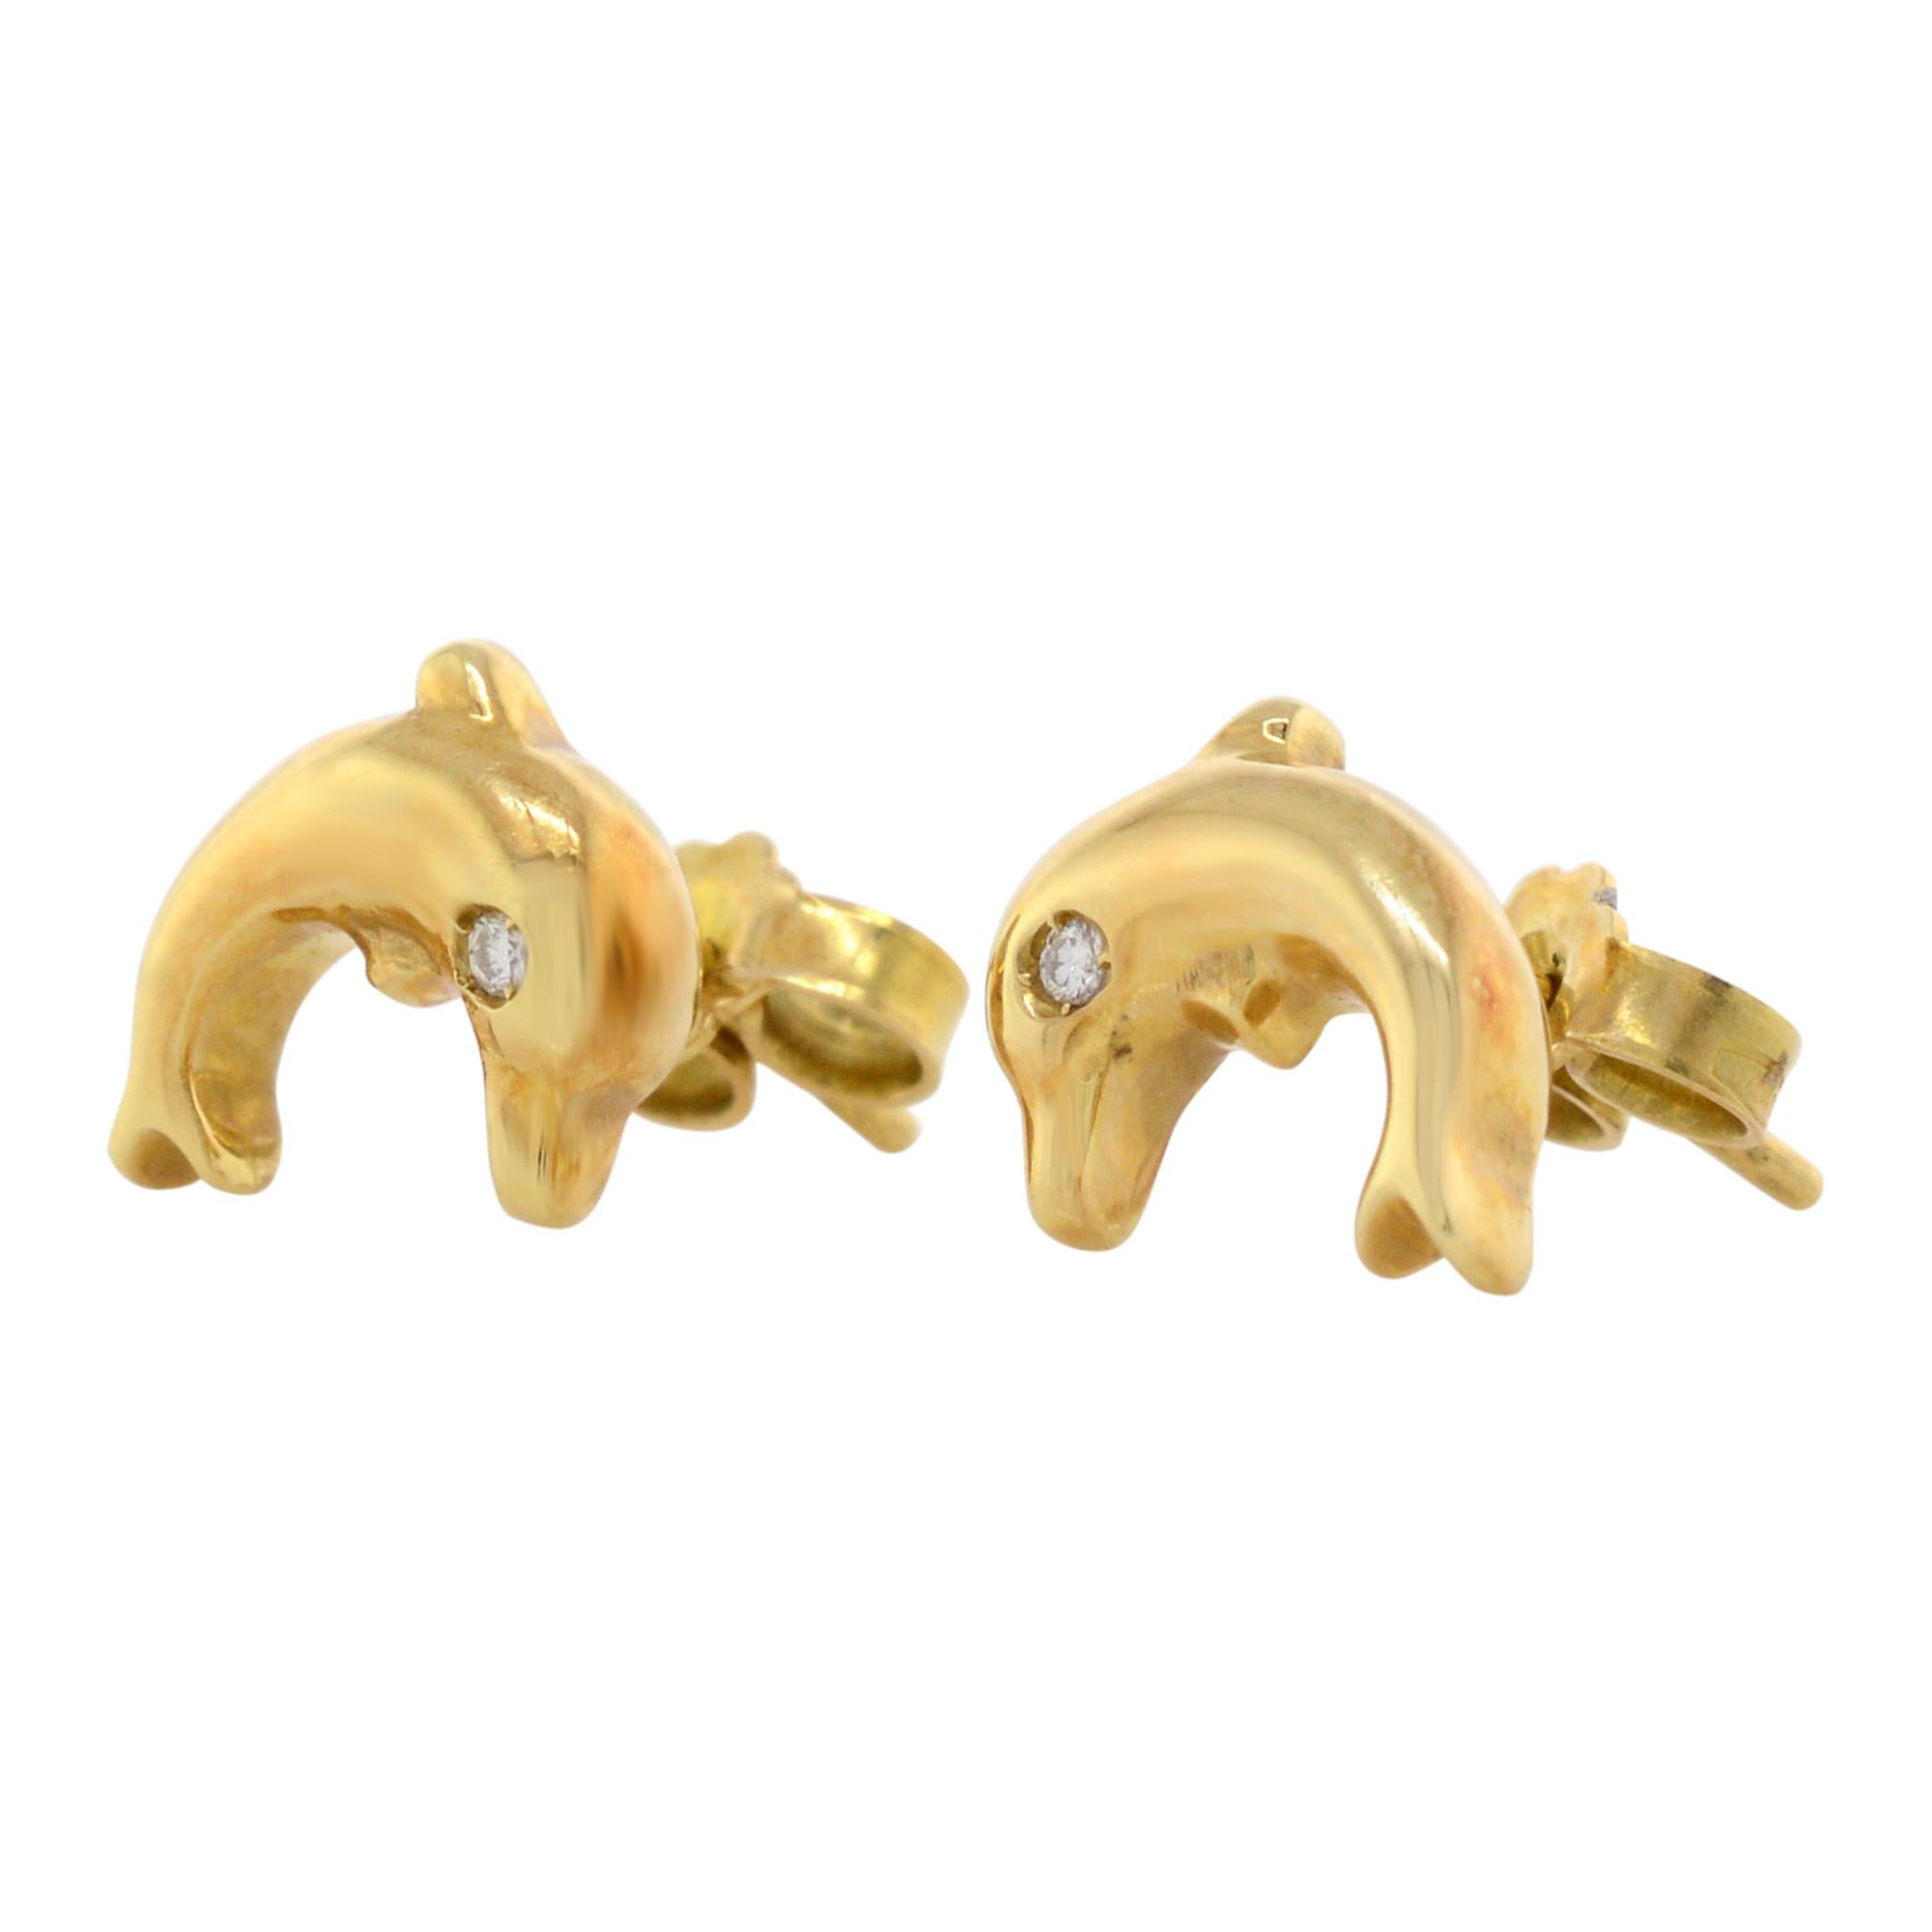 Stunning ladies' diamond dolphin stud earrings crafted in 18K yellow gold are a perfect gift for someone who is into nautical themes and loves water and ocean creatures. These Earrings feature tiny round cut diamonds as dolphin eyes. Total diamond